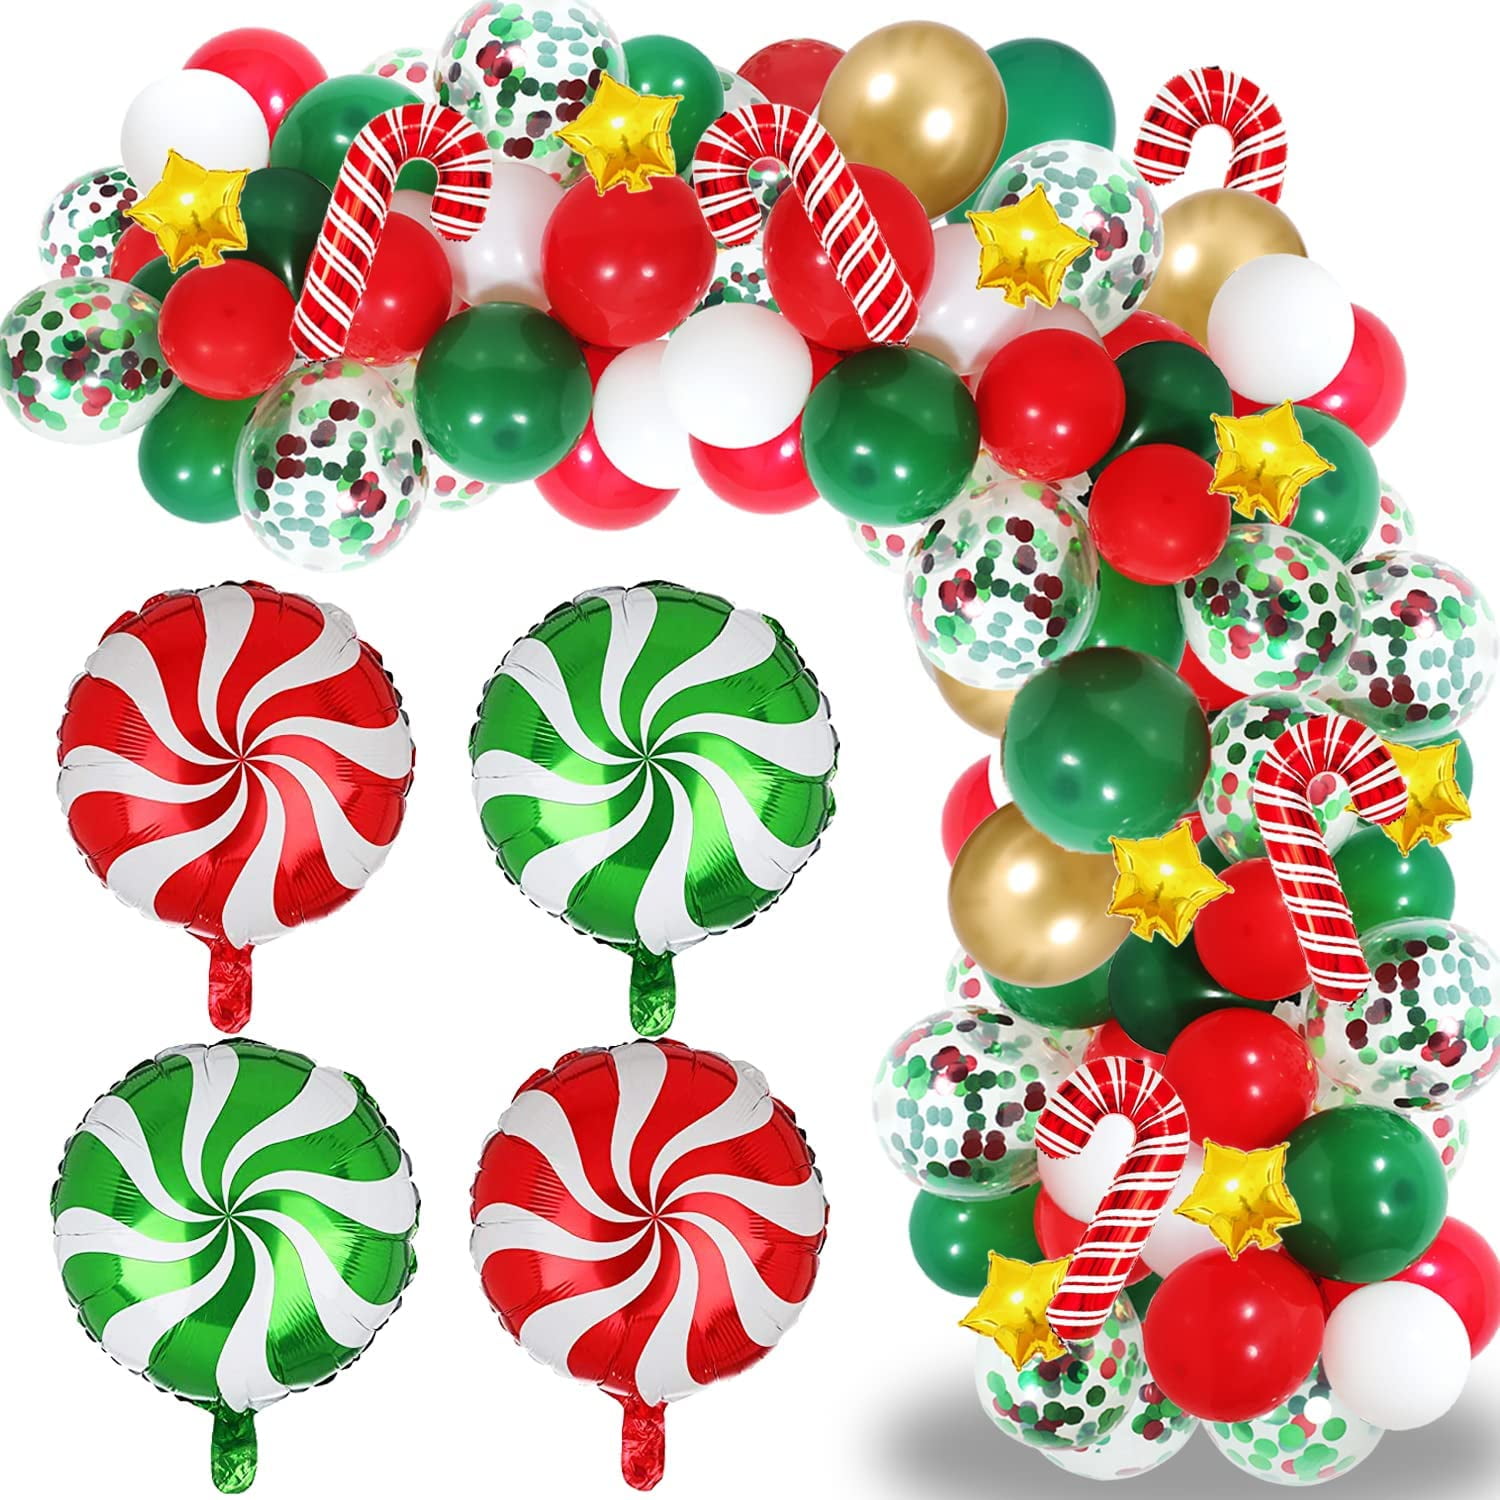 Merry Christmas Balloon Arch Garland Kit, 114 Pieces Green Red White Gold  Confetti Balloons with Santa Claus Mylar Balloon for Christmas Party